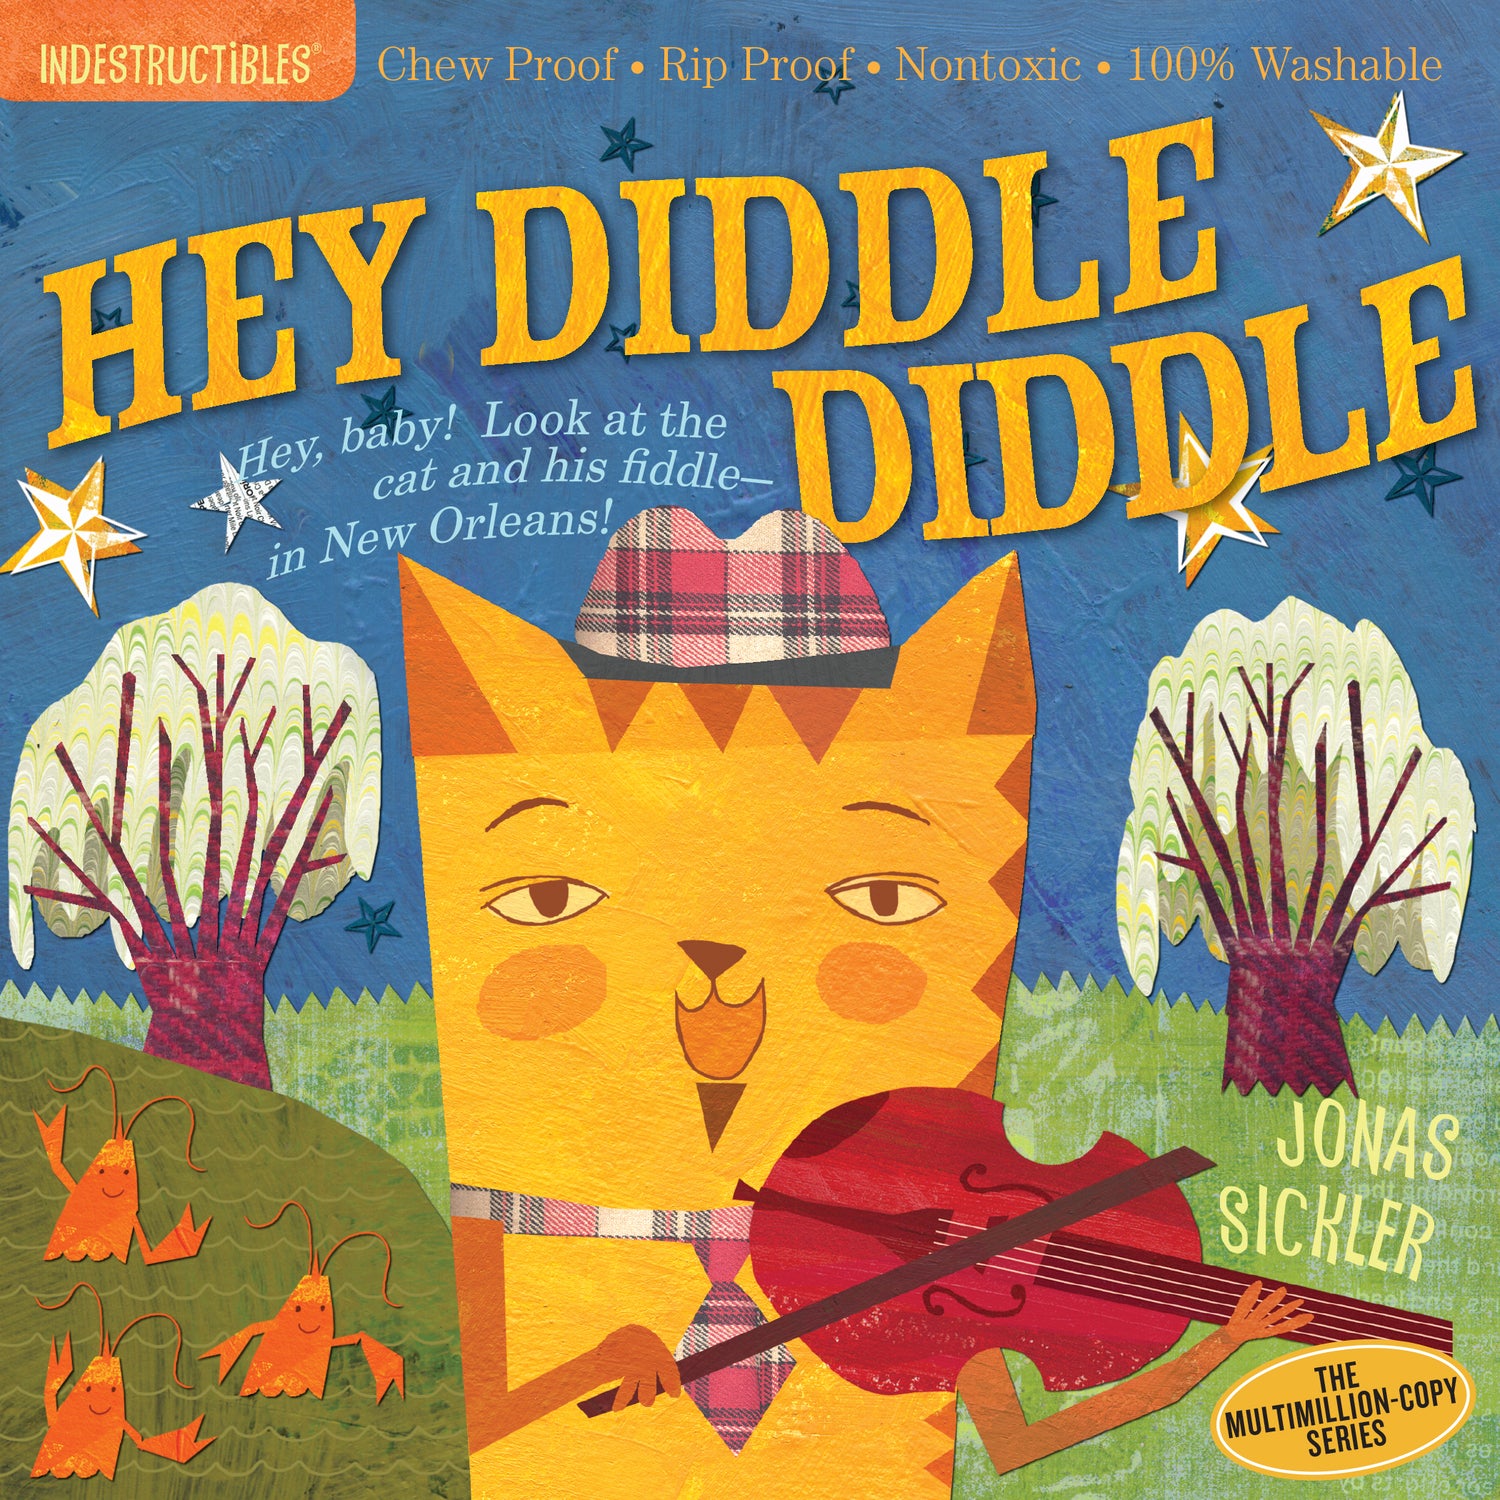 Indestructibles: Hey Diddle Diddle: Chew Proof · Rip Proof · Nontoxic · 100% Washable (Book for Babies, Newborn Books, Safe to Chew)